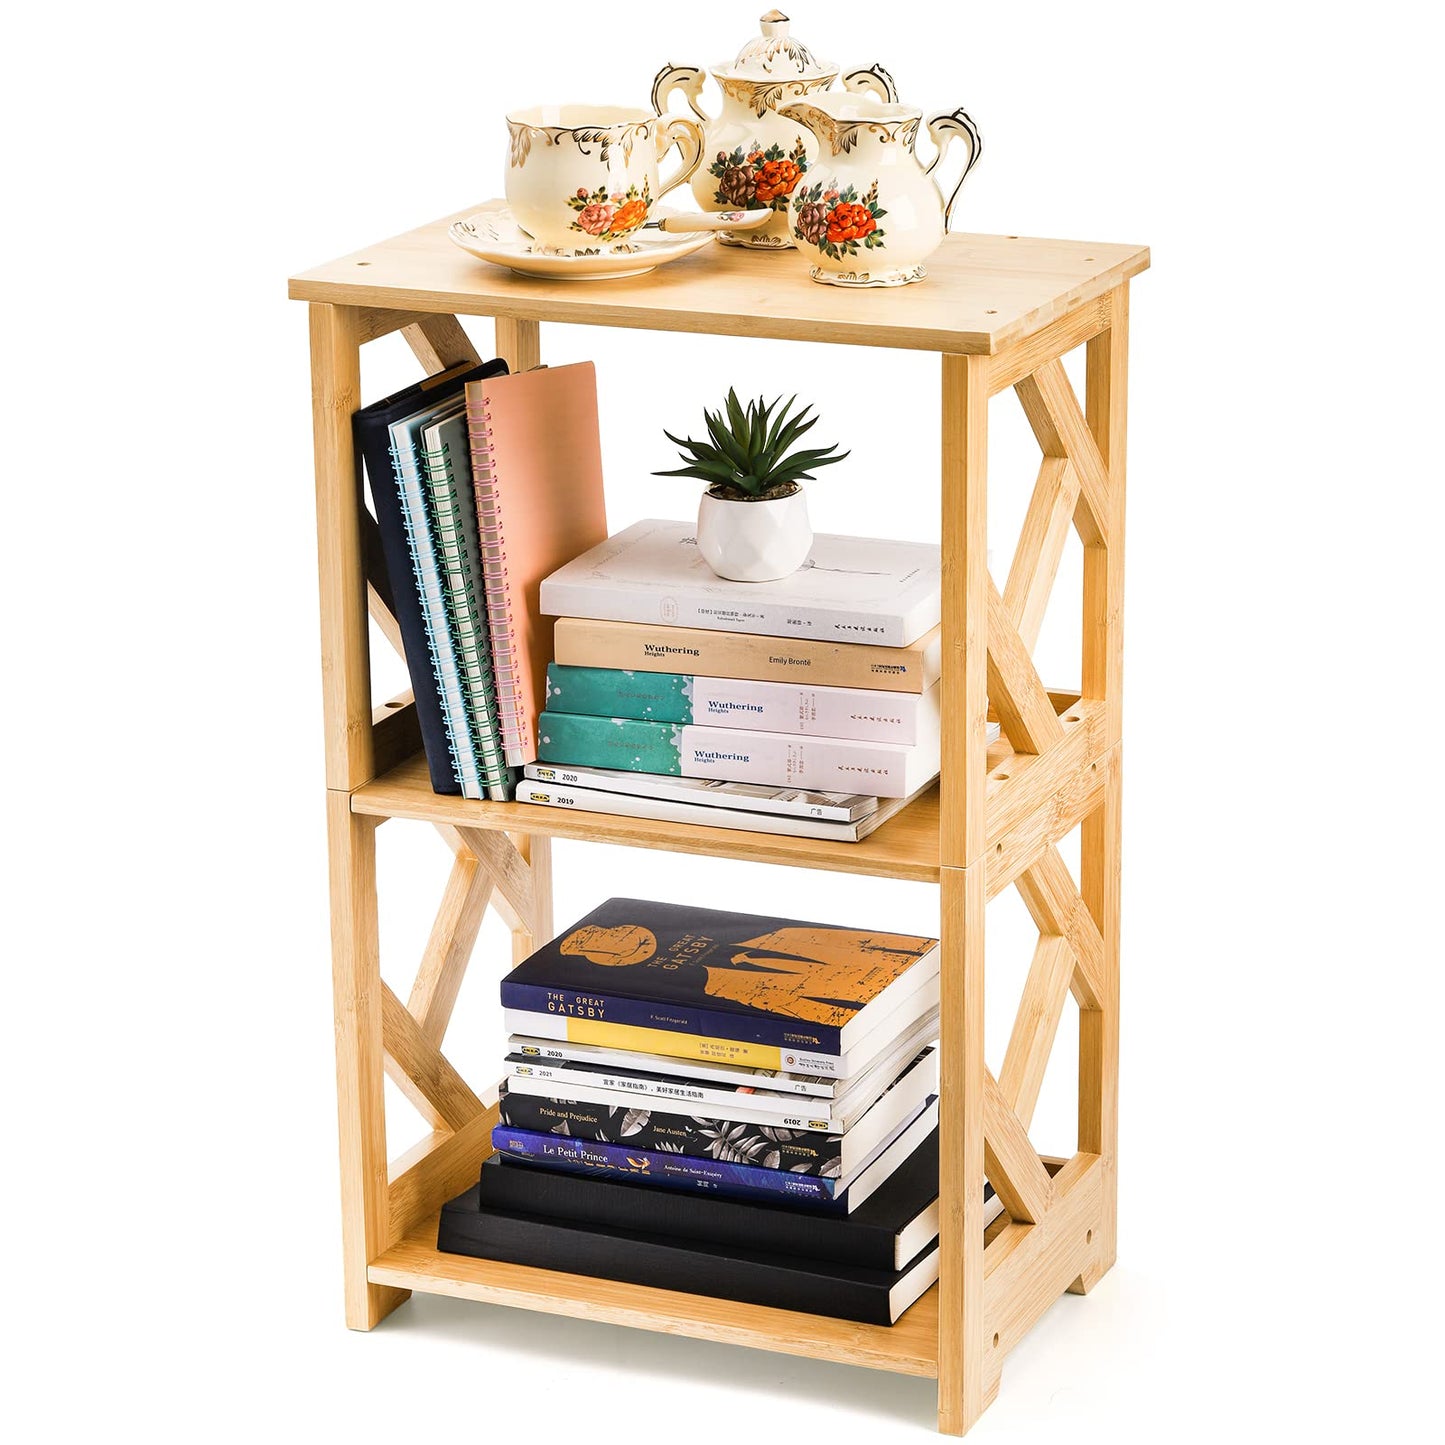 Frcctre 3-Tier Bamboo End Table Side Table Bedside Nightstand, 2 Shelf Small Bookshelf Bookcase, Multifunctional Display Rack Storage Stand for Bathroom, Bedroom and Living Room